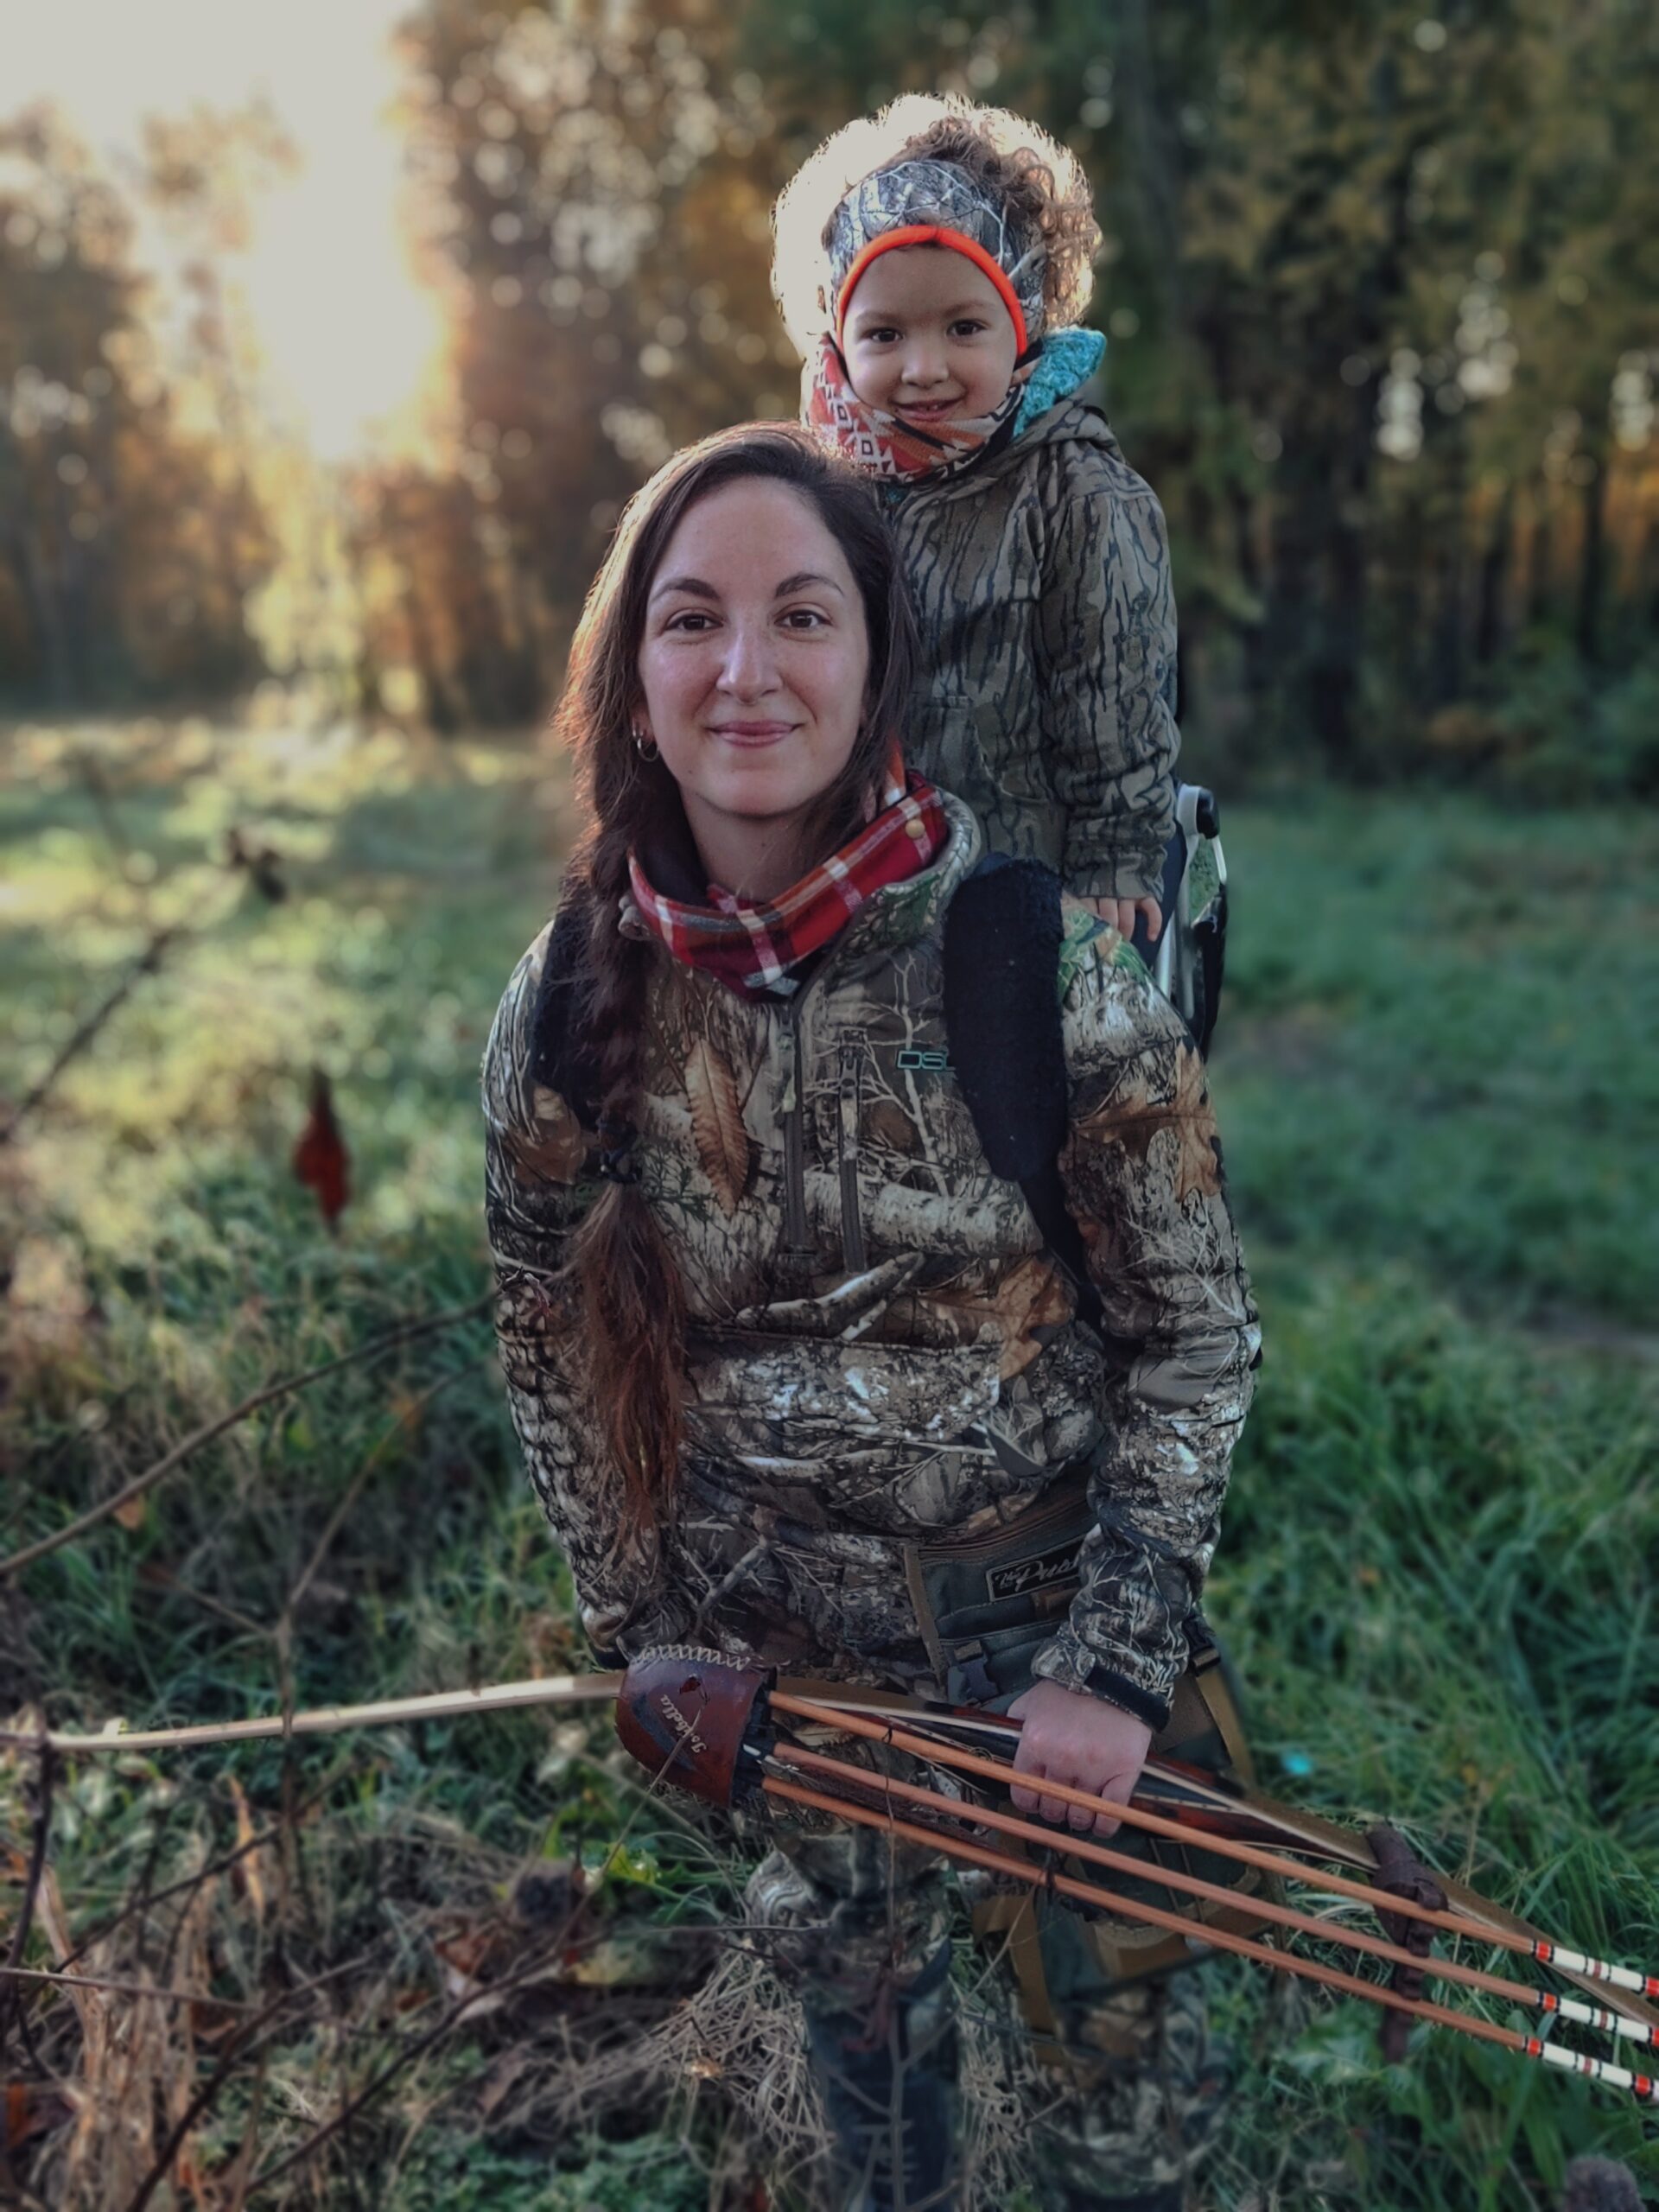 Hunting mamas like Beka Garris are often accidental and deliberate influencers.